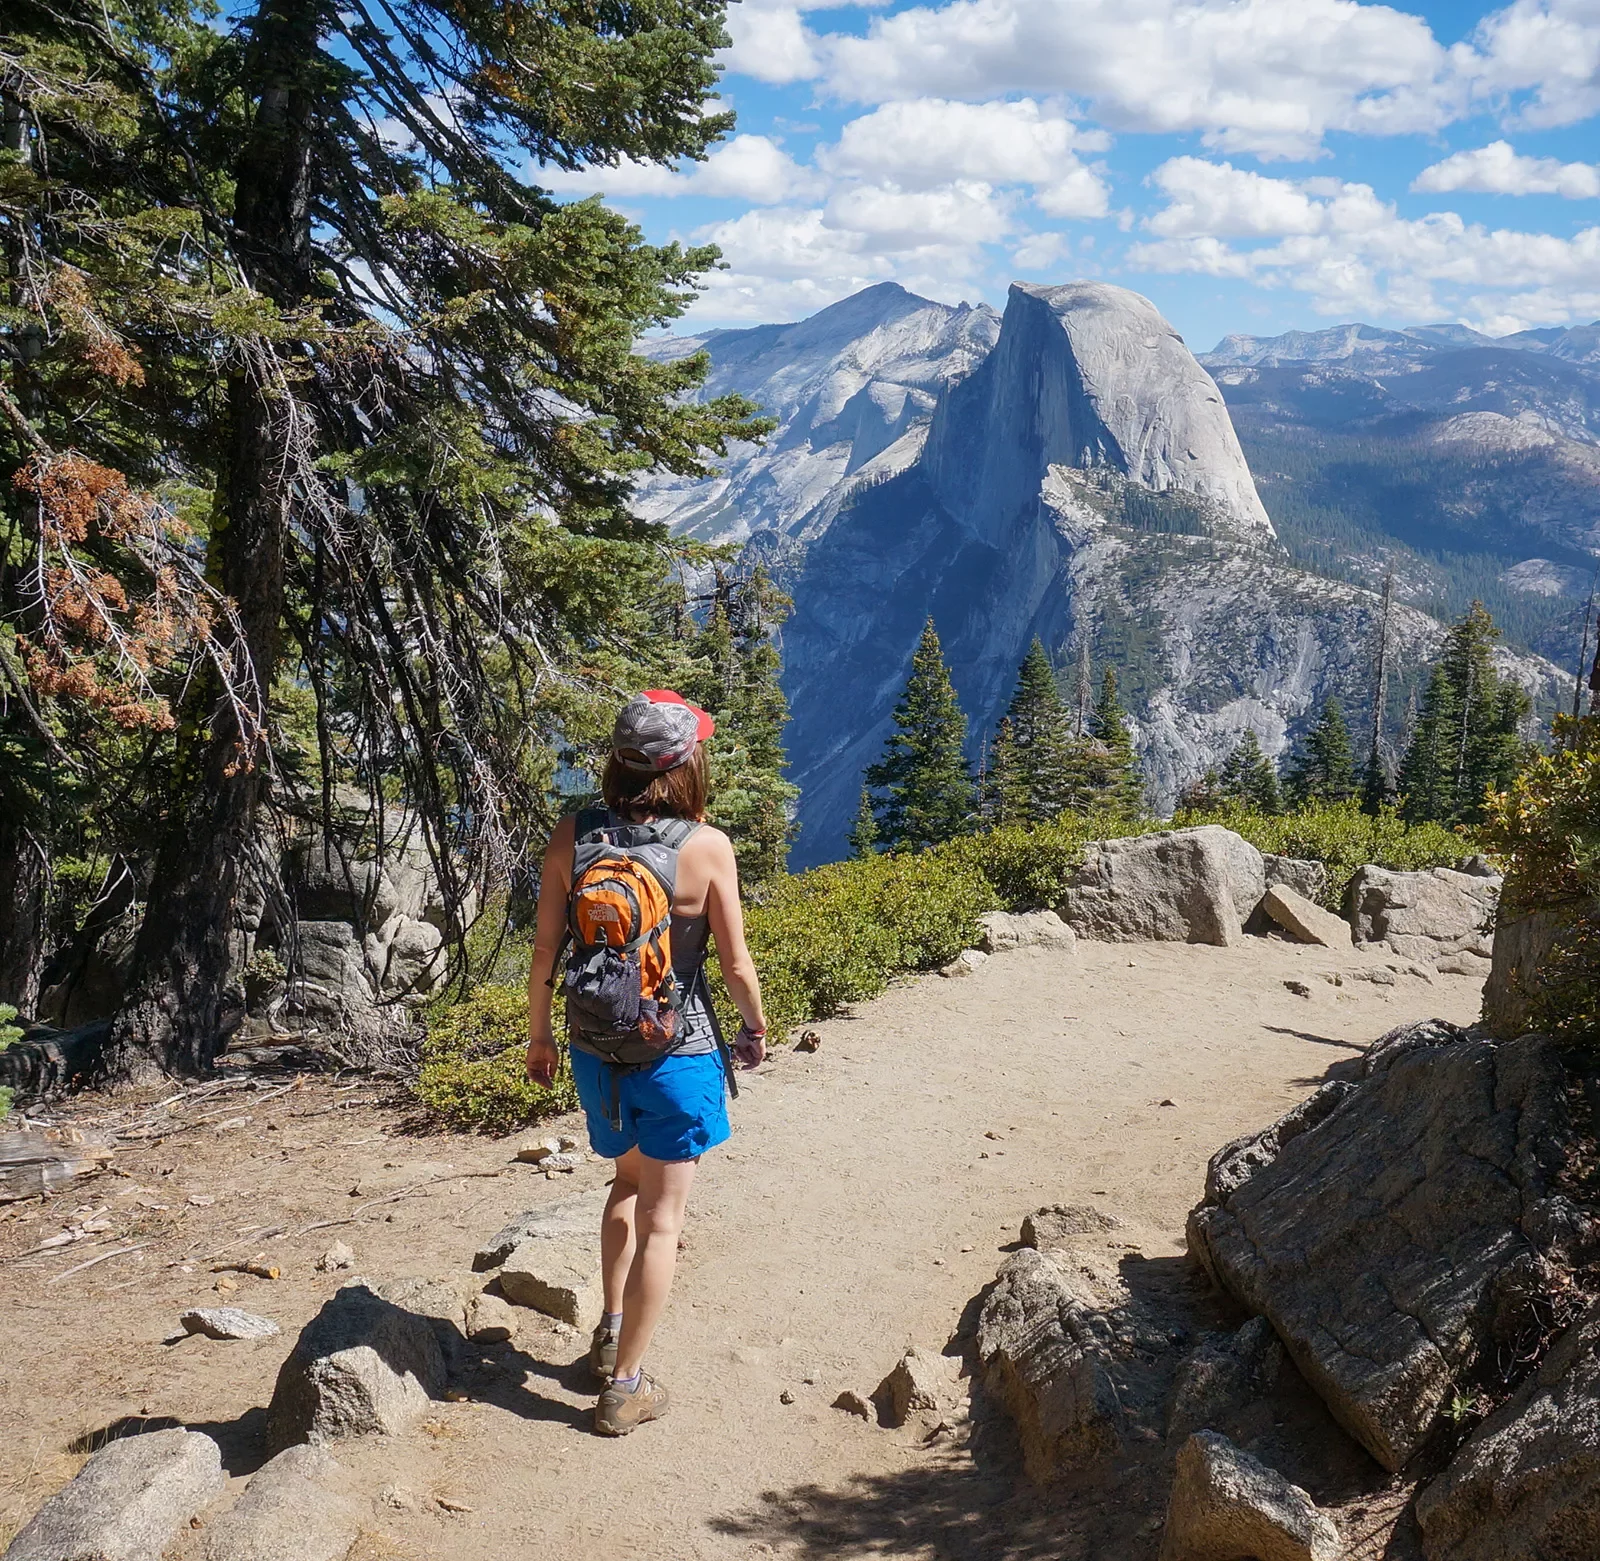 Guest walking on mountain trail, Half Dome in distance.